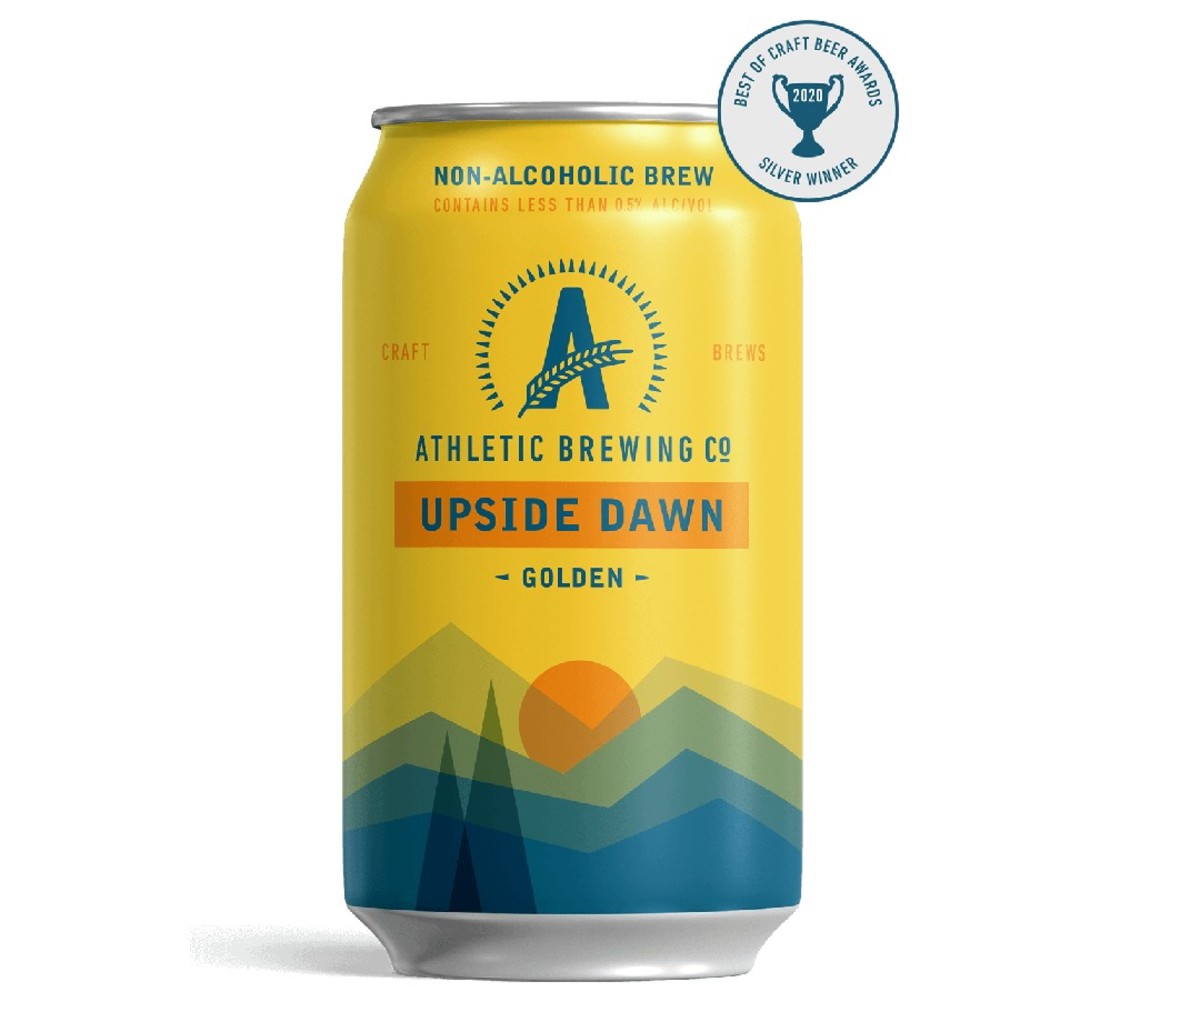 12 oz can of Athletic Upside Dawn Golden Ale